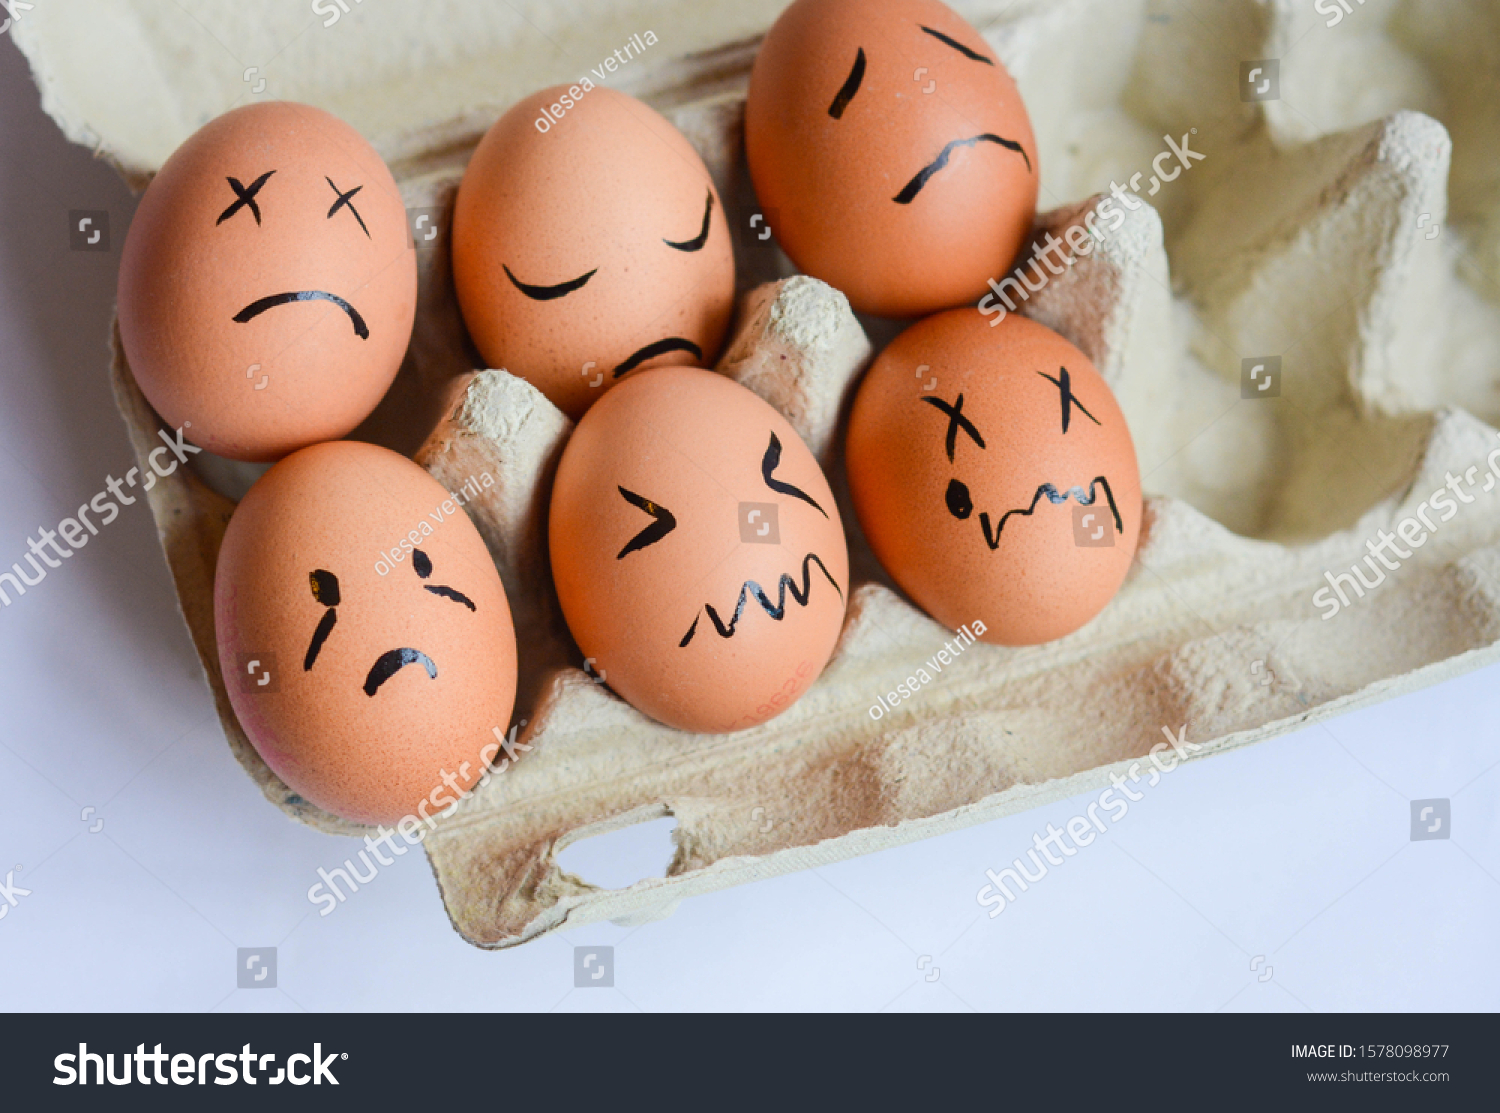 Chicken eggs with various emotions and facial expressions. Emotional stability concept represented  #1578098977